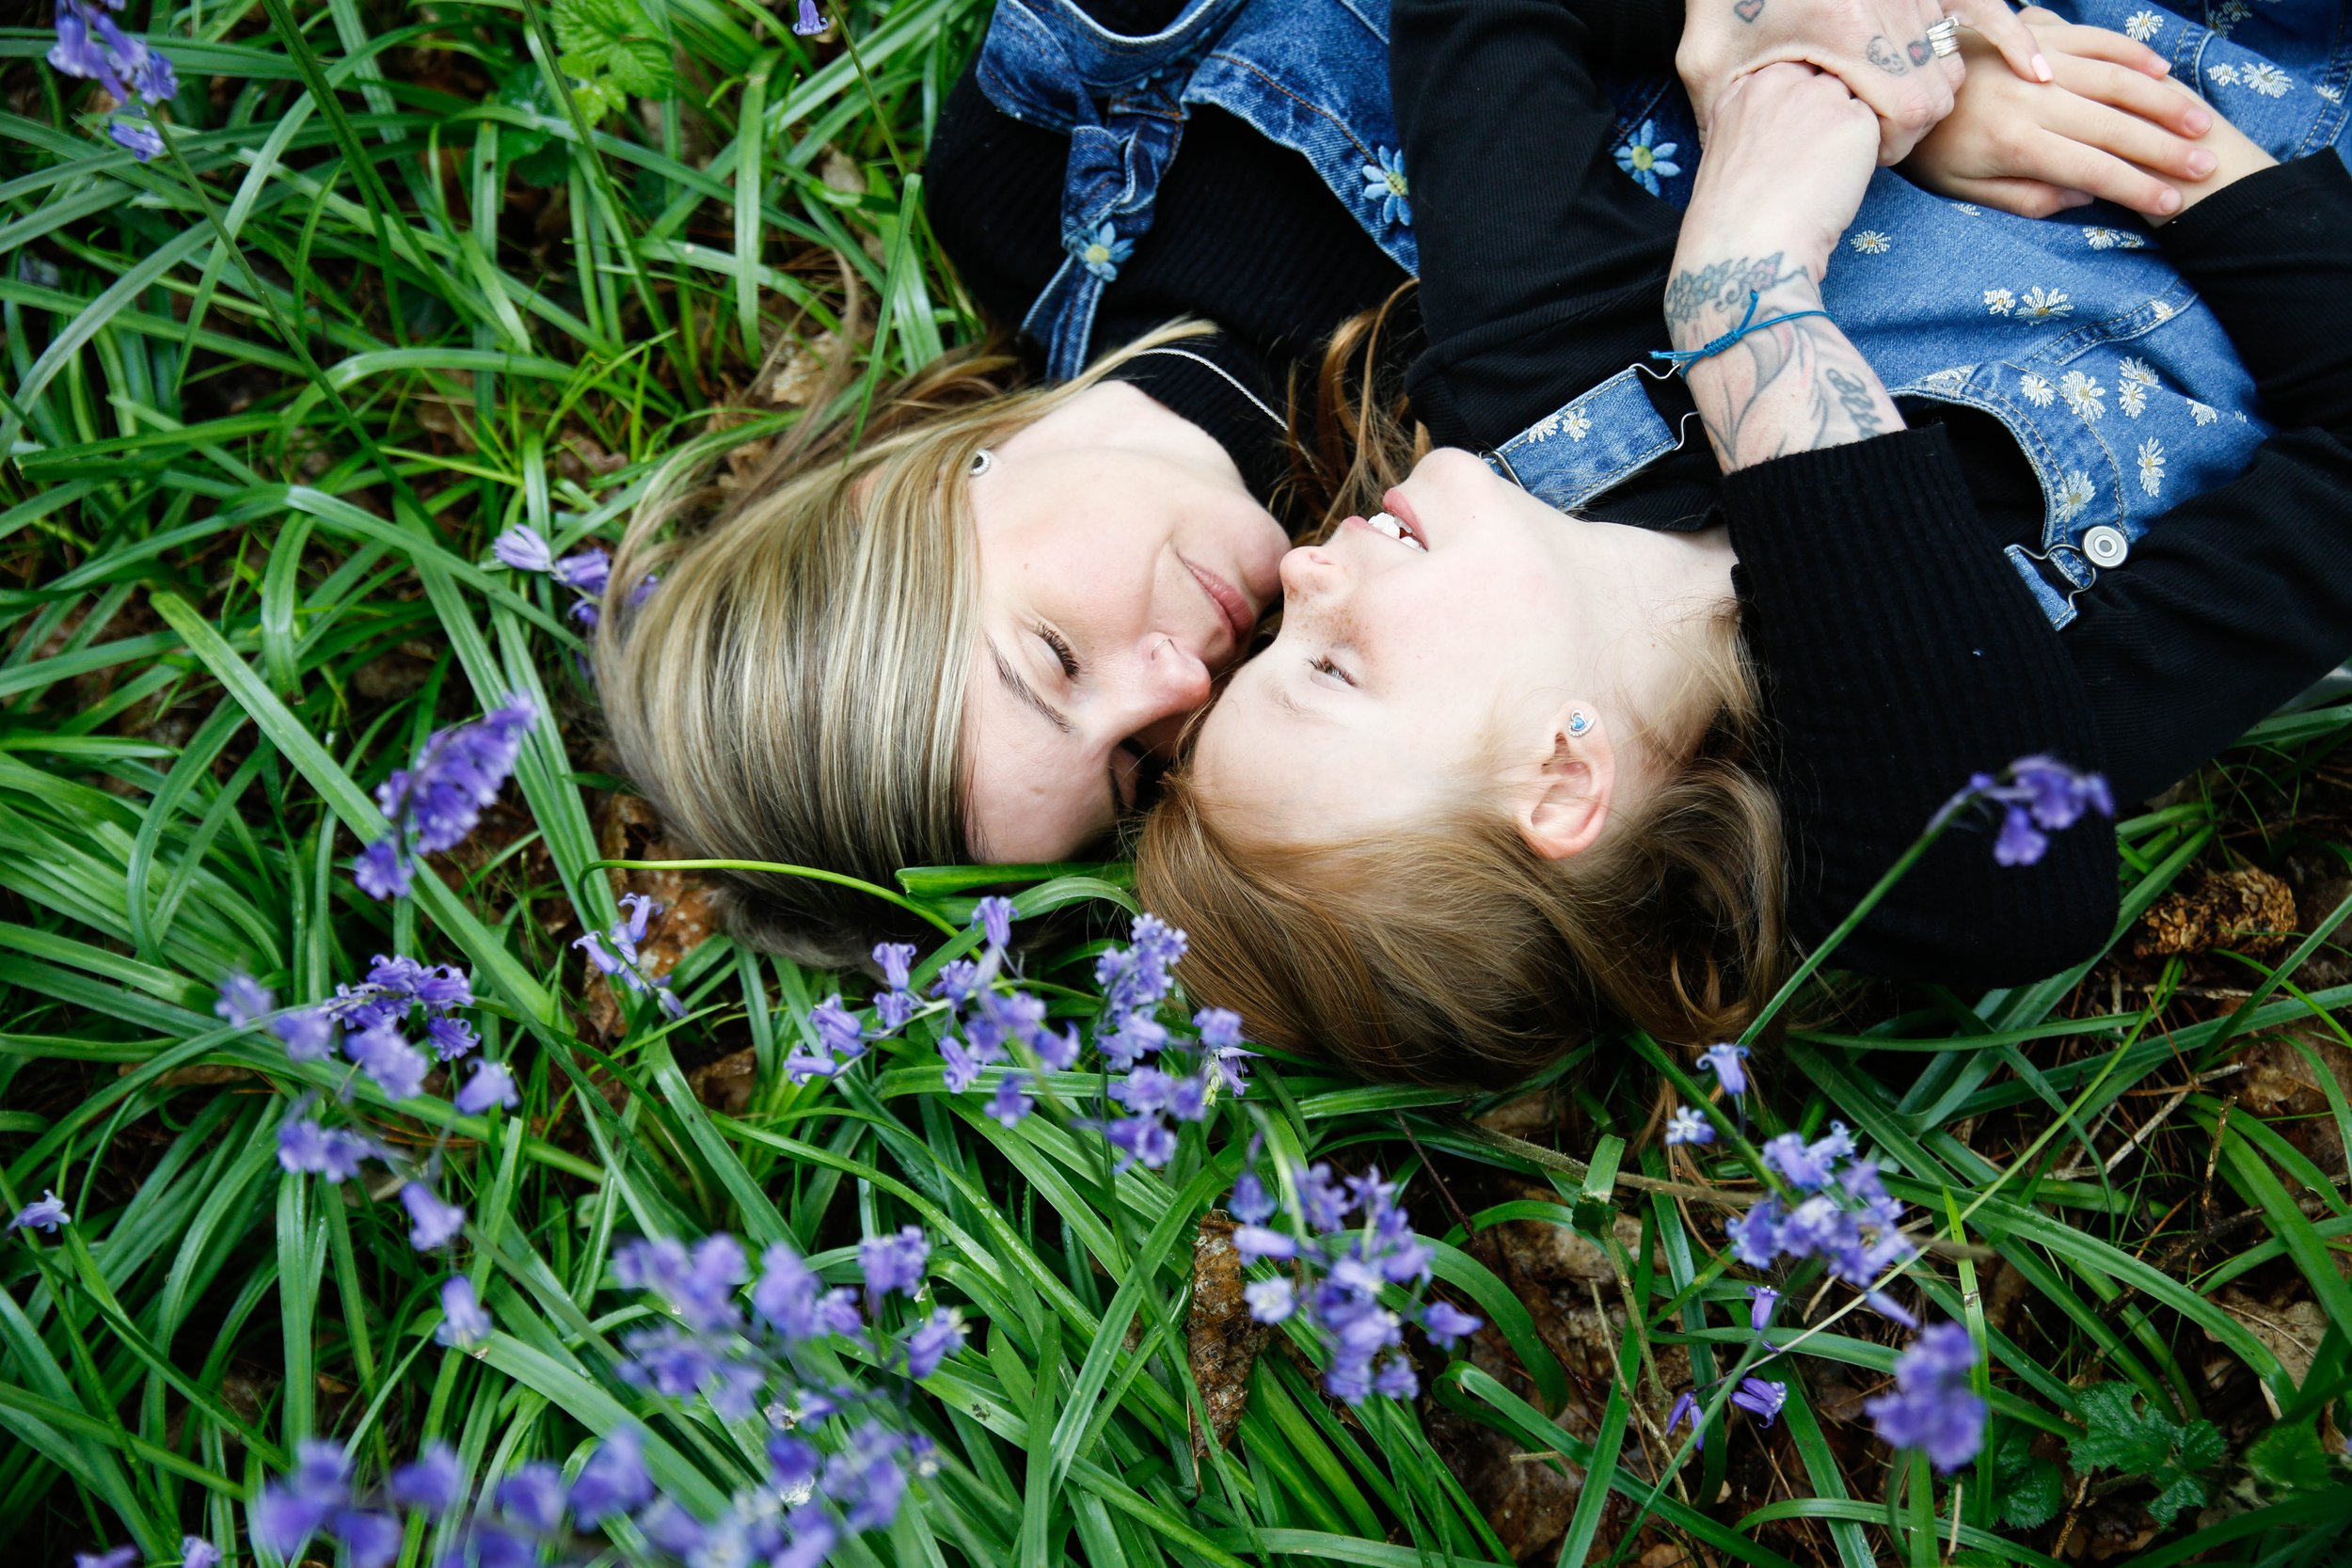 MUM AND DAUGHTER PHOTO SHOOT IN THE BLUEBELLS | BERKSHIRE PORTRAIT SHOOTS16 choice .JPG